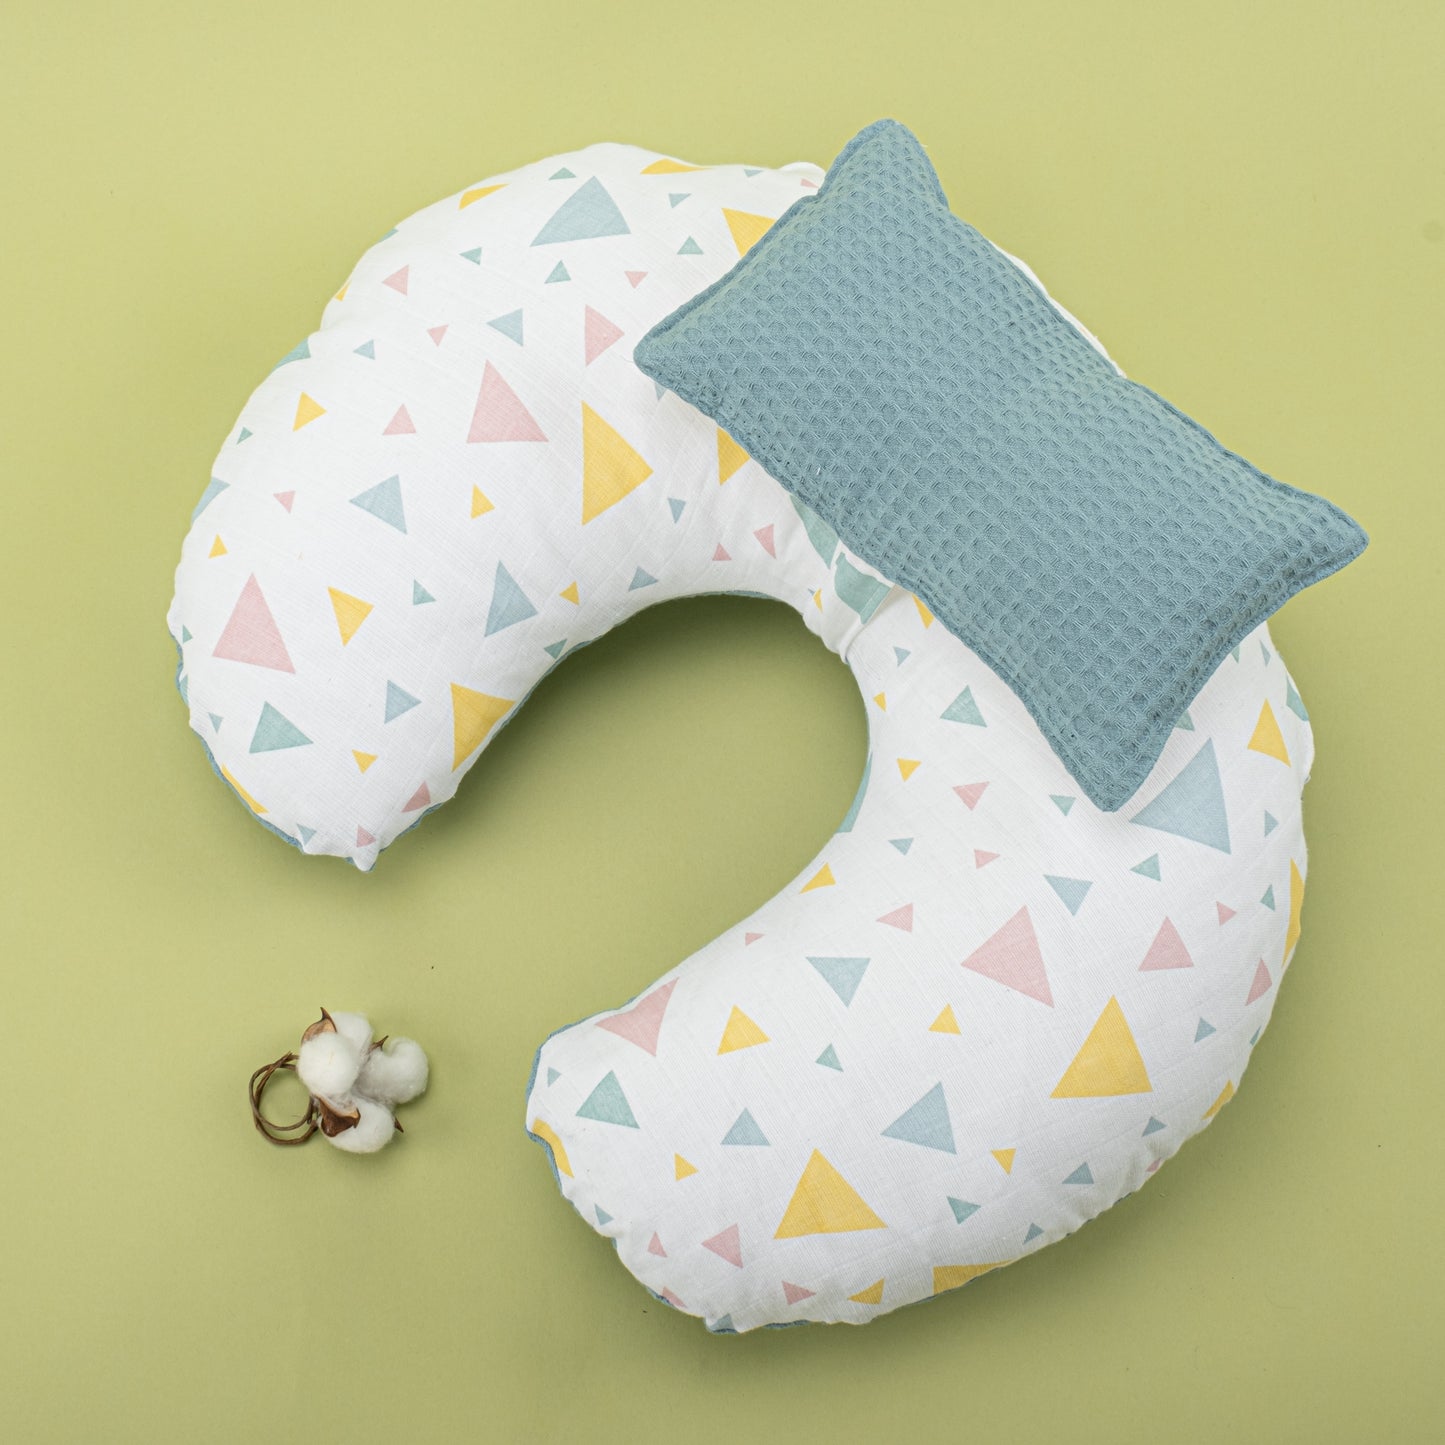 Breastfeeding Pillow - Petrol Blue Honeycomb - Colored Triangles